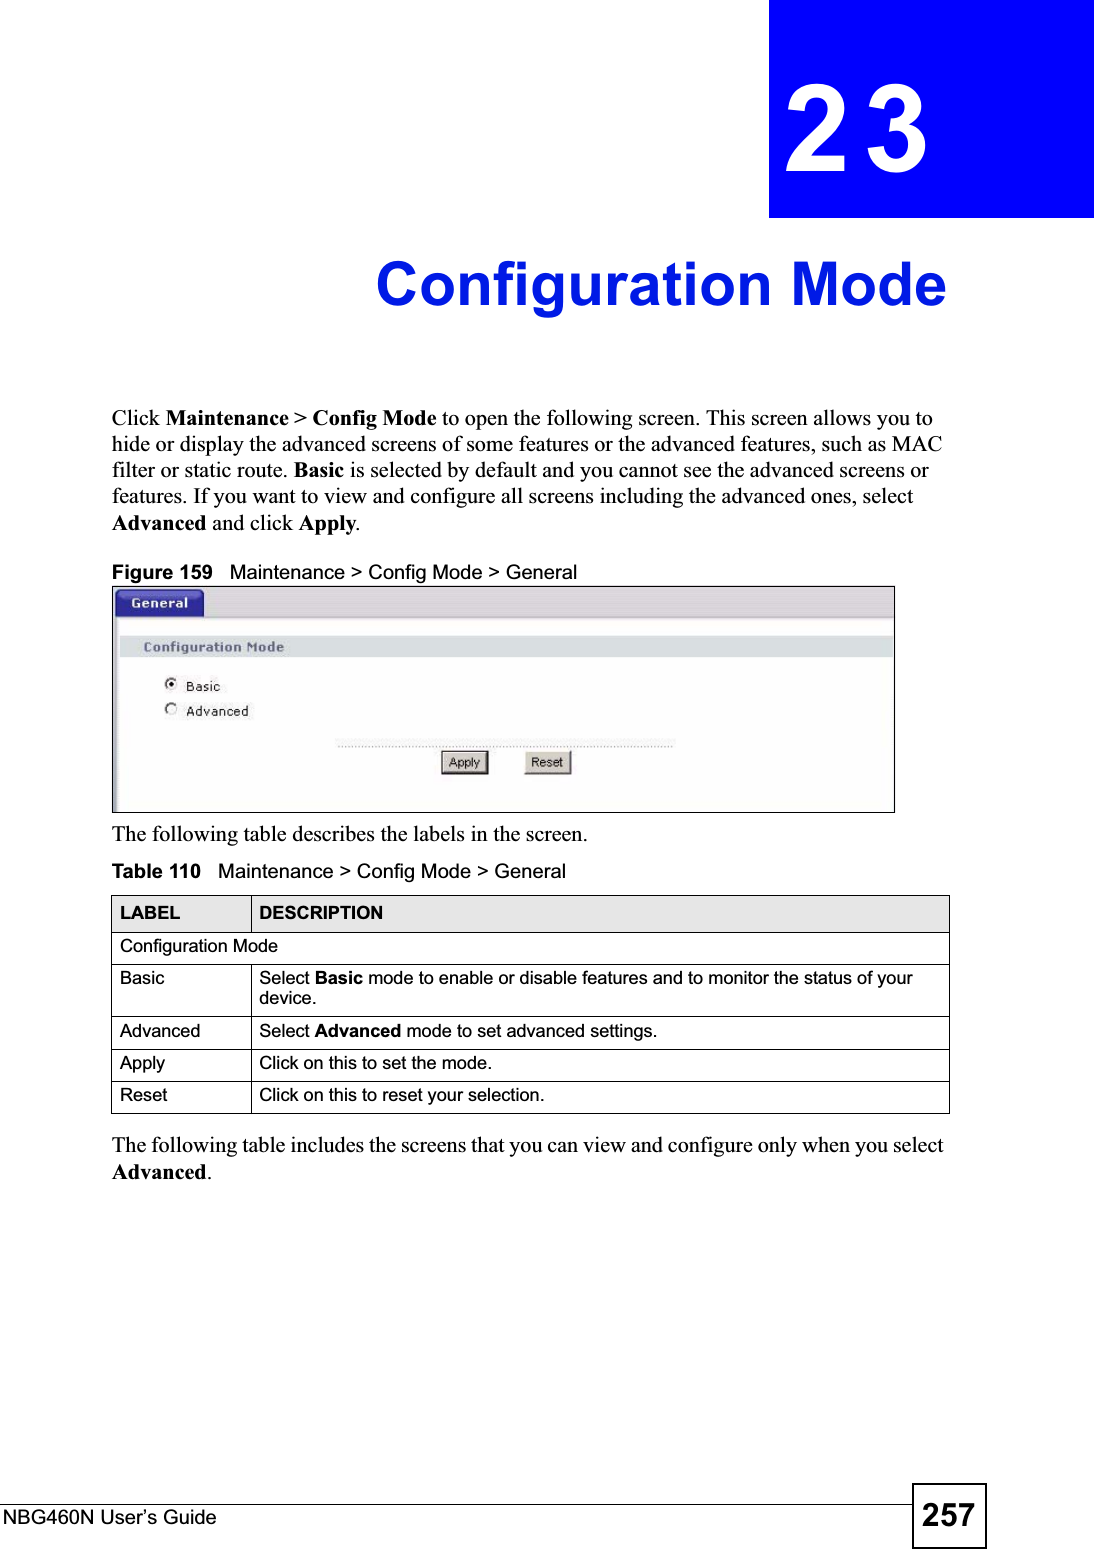 NBG460N User’s Guide 257CHAPTER 23Configuration ModeClick Maintenance &gt; Config Mode to open the following screen. This screen allows you to hide or display the advanced screens of some features or the advanced features, such as MAC filter or static route. Basic is selected by default and you cannot see the advanced screens or features. If you want to view and configure all screens including the advanced ones, select Advanced and click Apply.Figure 159   Maintenance &gt; Config Mode &gt; General The following table describes the labels in the screen.Table 110   Maintenance &gt; Config Mode &gt; General The following table includes the screens that you can view and configure only when you select Advanced.LABEL DESCRIPTIONConfiguration ModeBasic Select Basic mode to enable or disable features and to monitor the status of your device.Advanced Select Advanced mode to set advanced settings.Apply Click on this to set the mode.Reset Click on this to reset your selection.